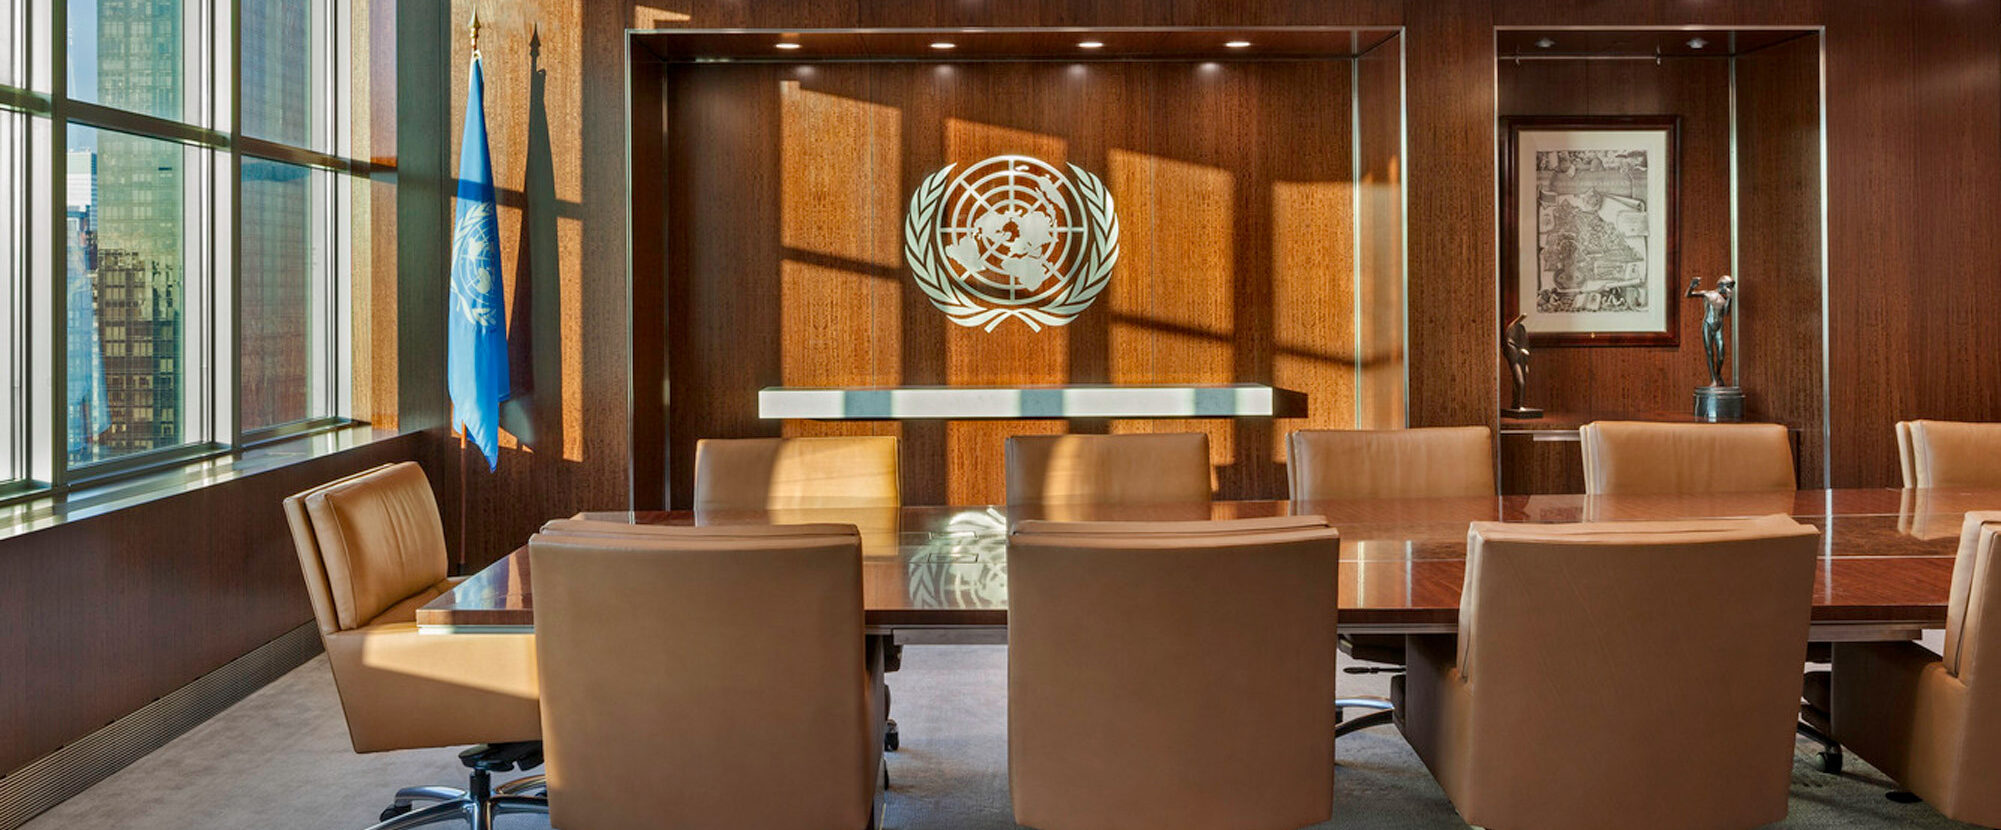 Modern conference room with floor-to-ceiling windows providing ample natural light, complementing the rich wooden wall panels and sleek, rectangular table. Brown leather swivel chairs encircle the table, while the United Nations emblem commands attention on the focal wall.